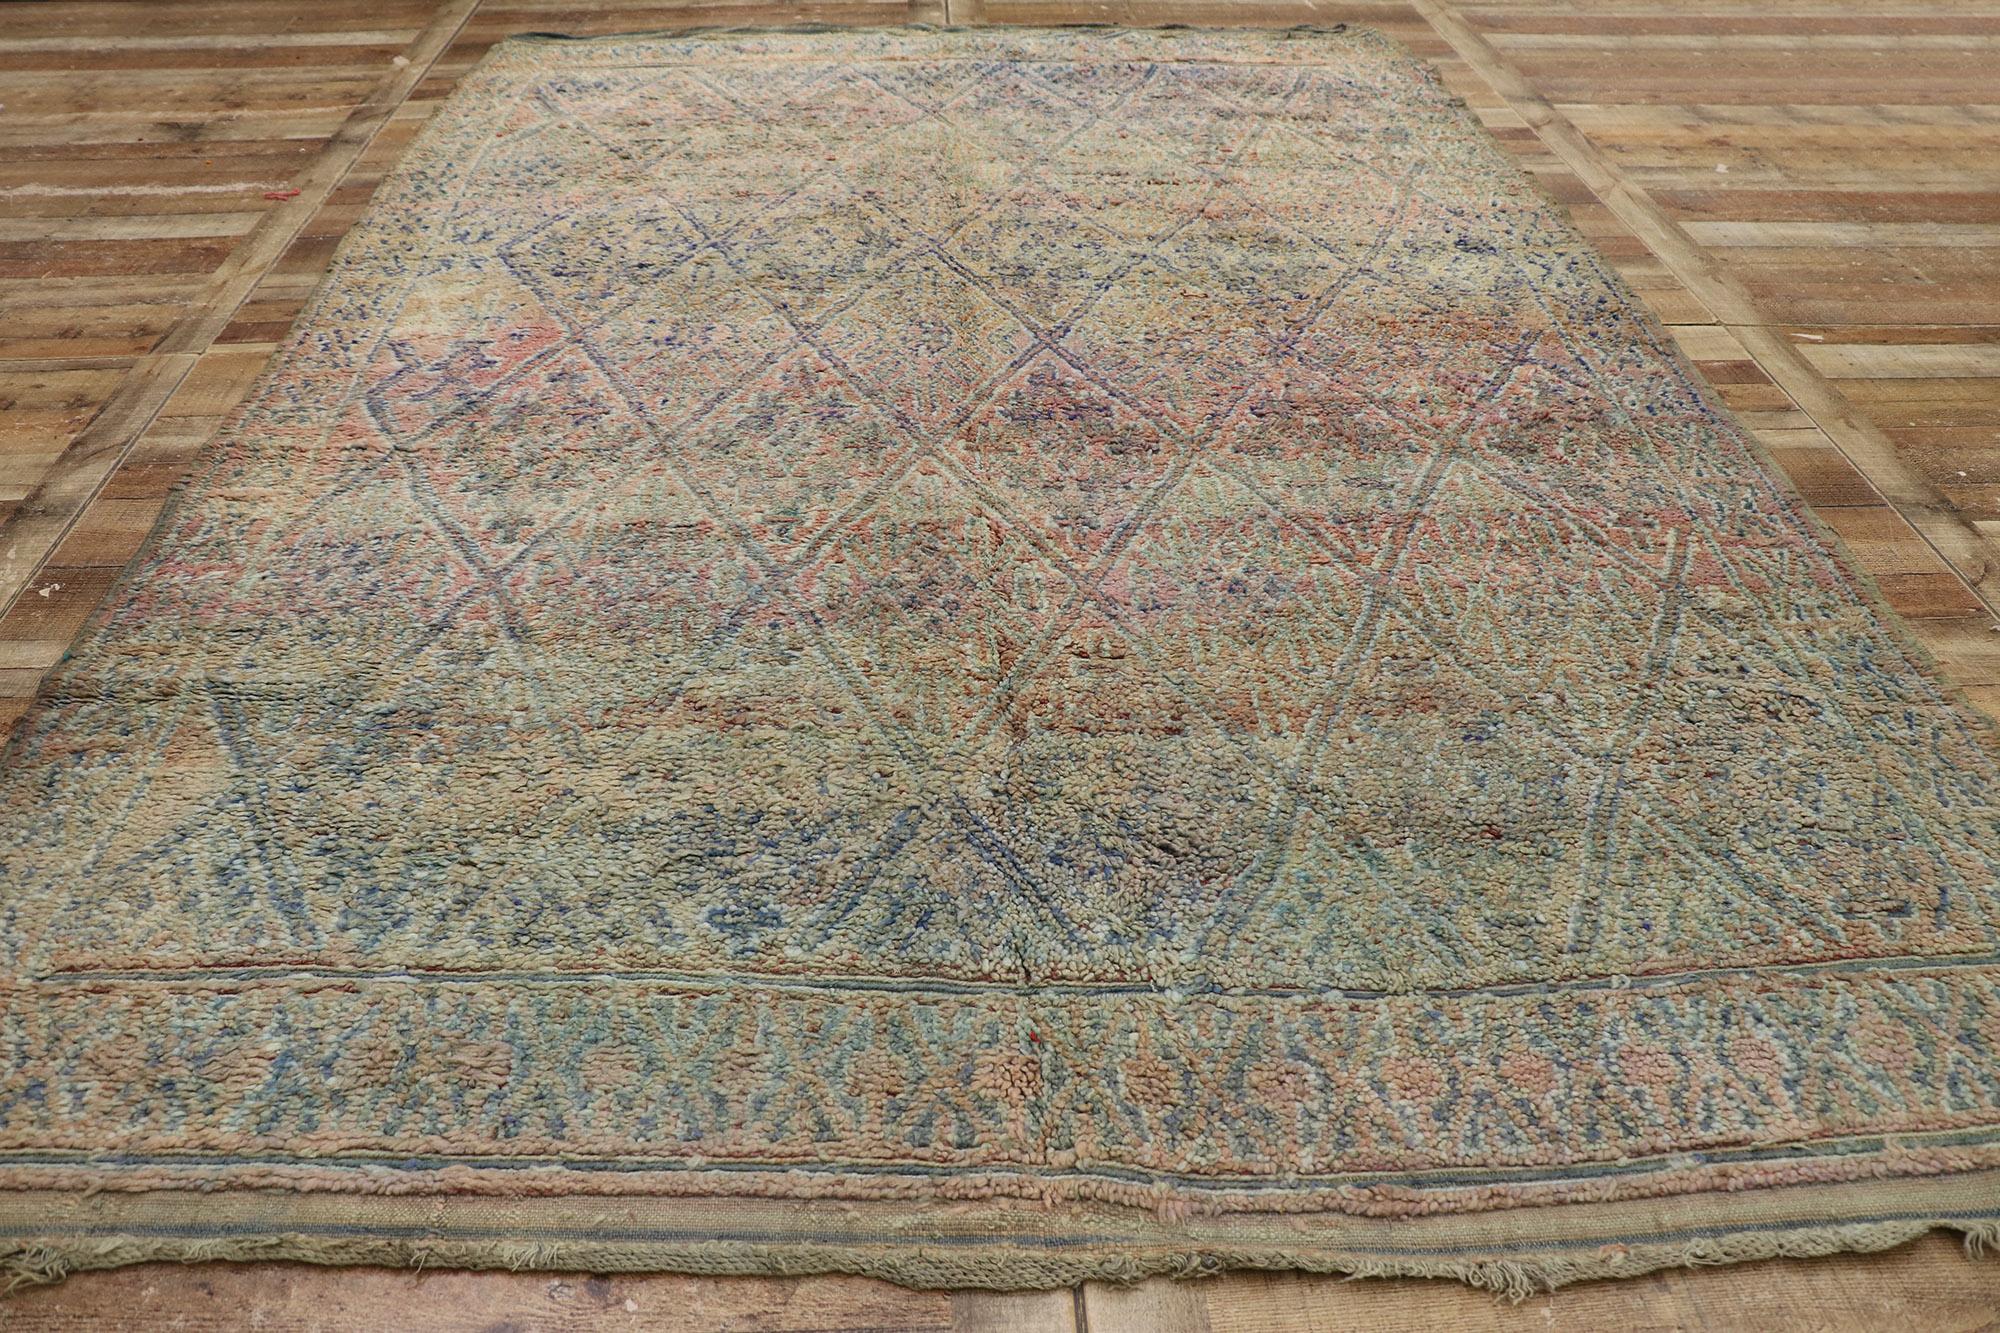 Vintage Berber Boujad Moroccan Rug with Bohemian Style 1